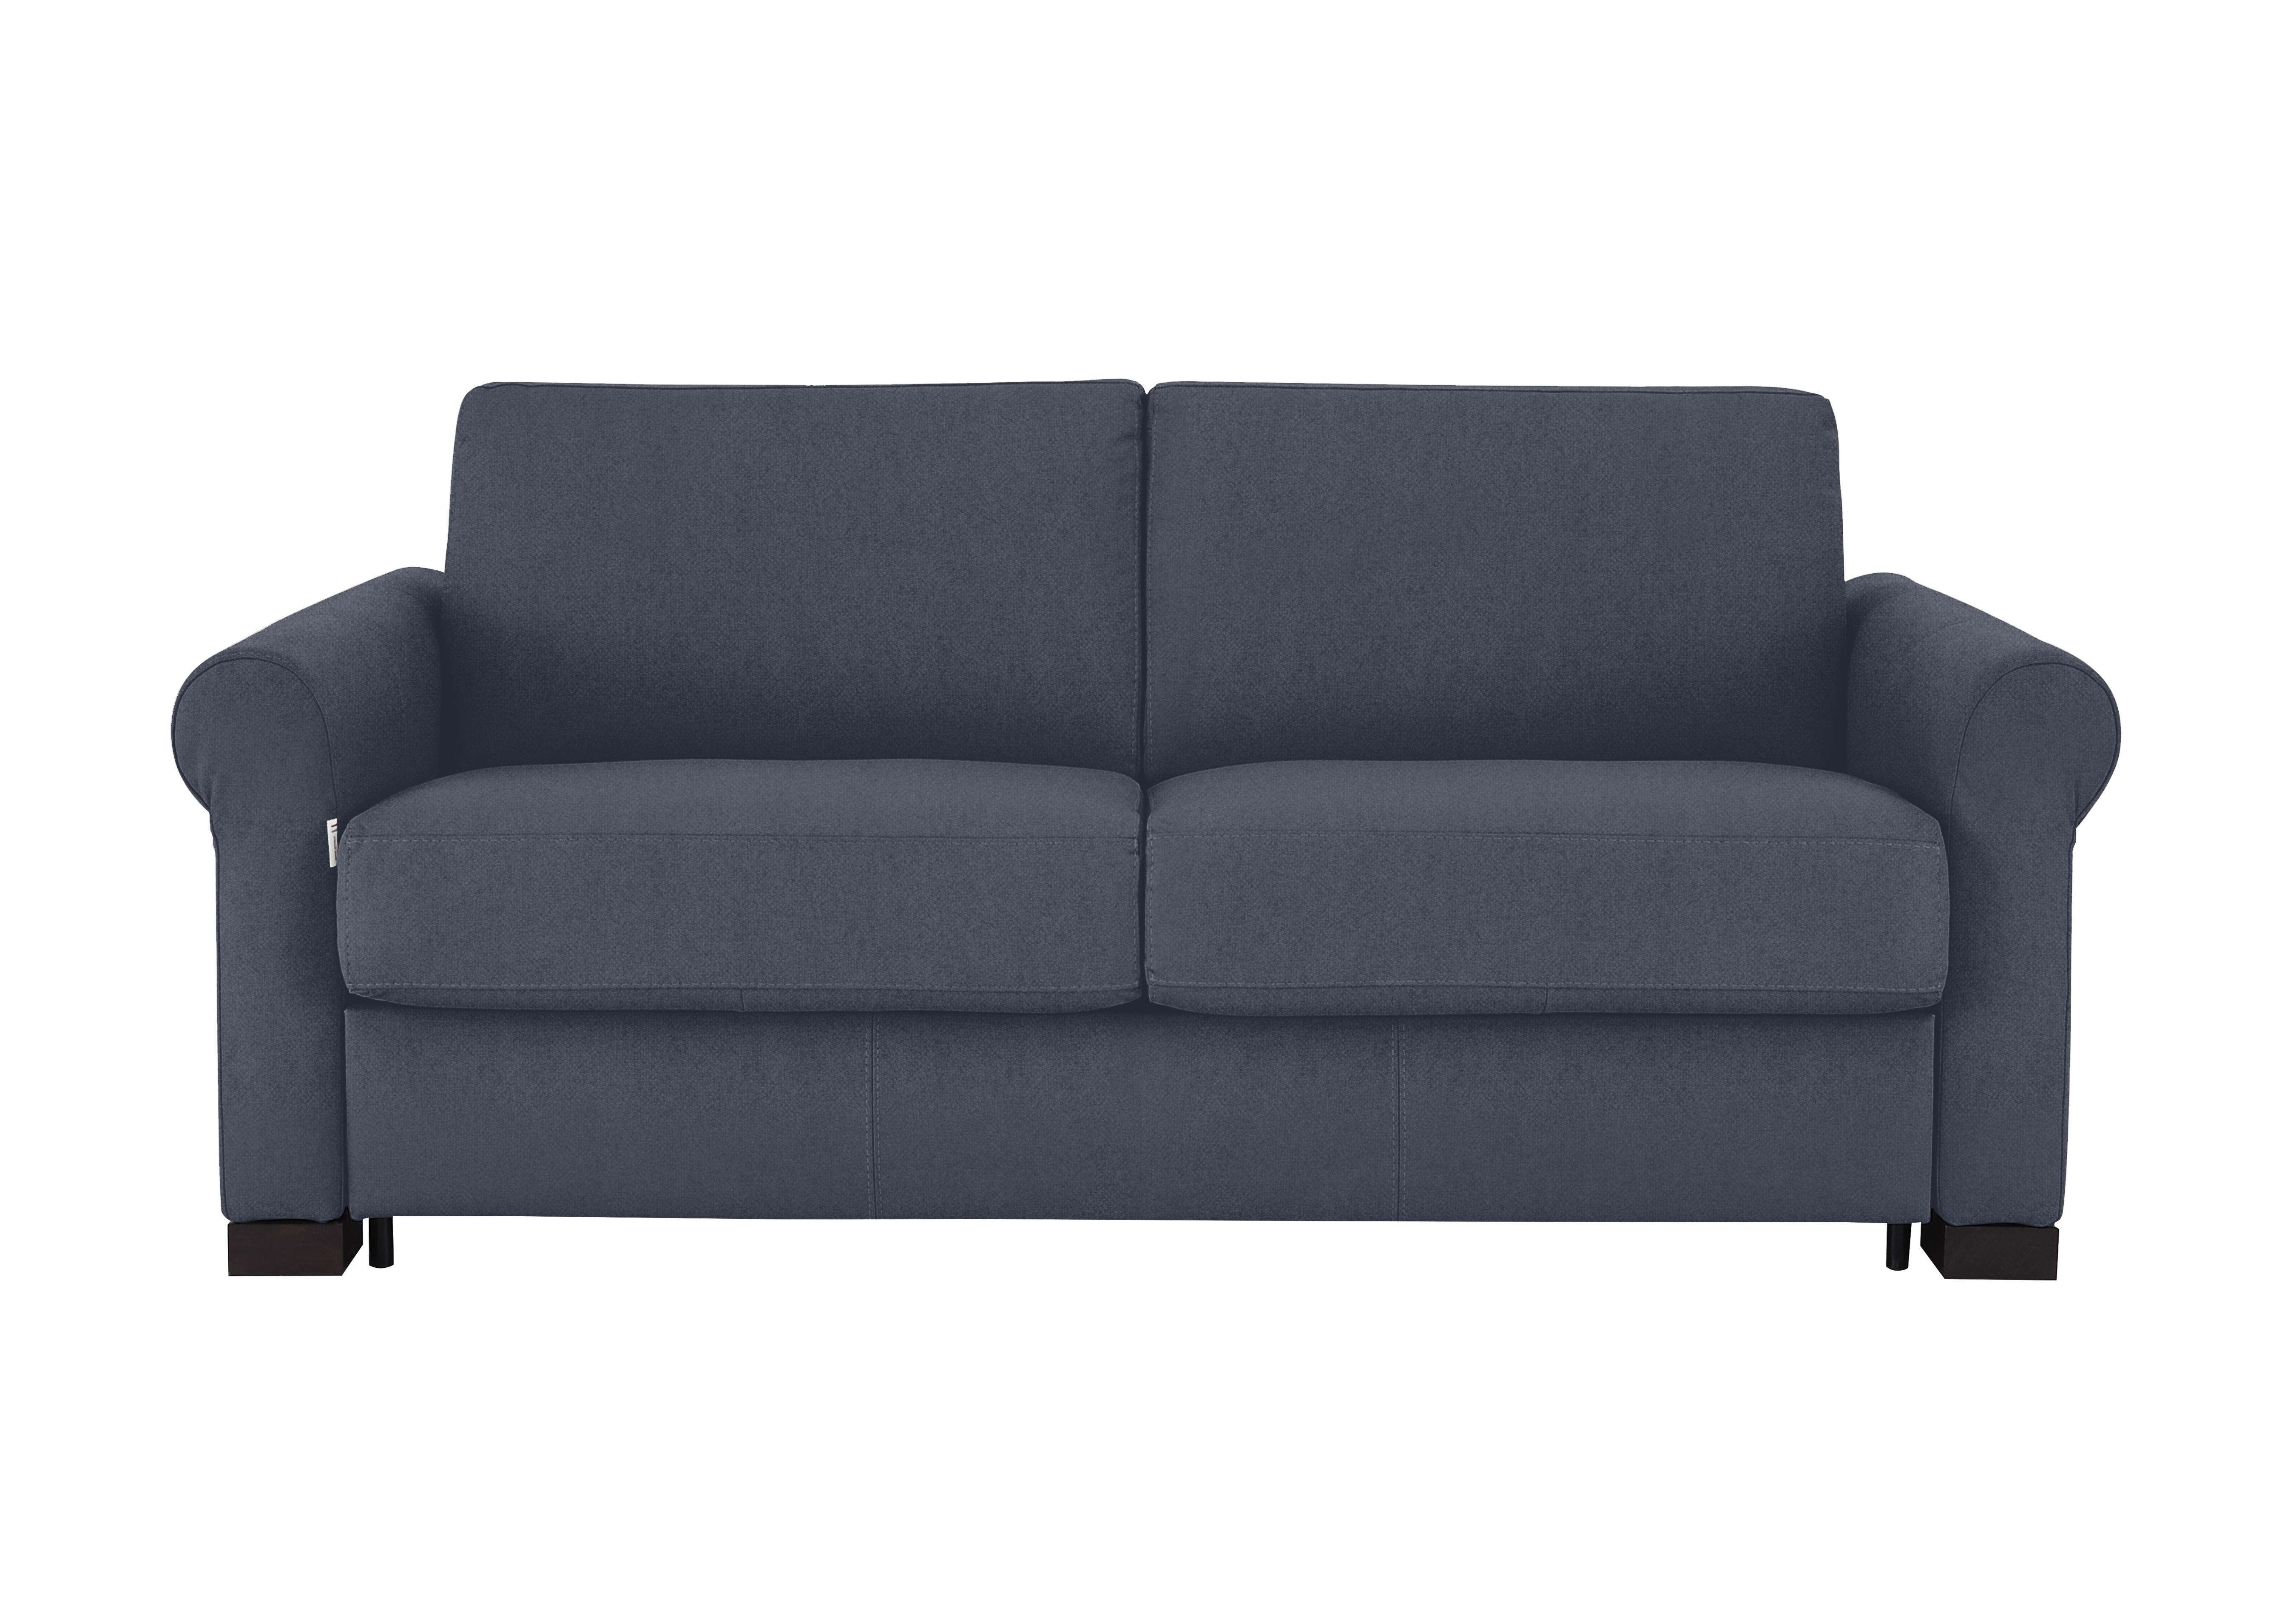 Alcova 2.5 Seater Fabric Sofa Bed with Scroll Arms in Fuente Ocean on Furniture Village